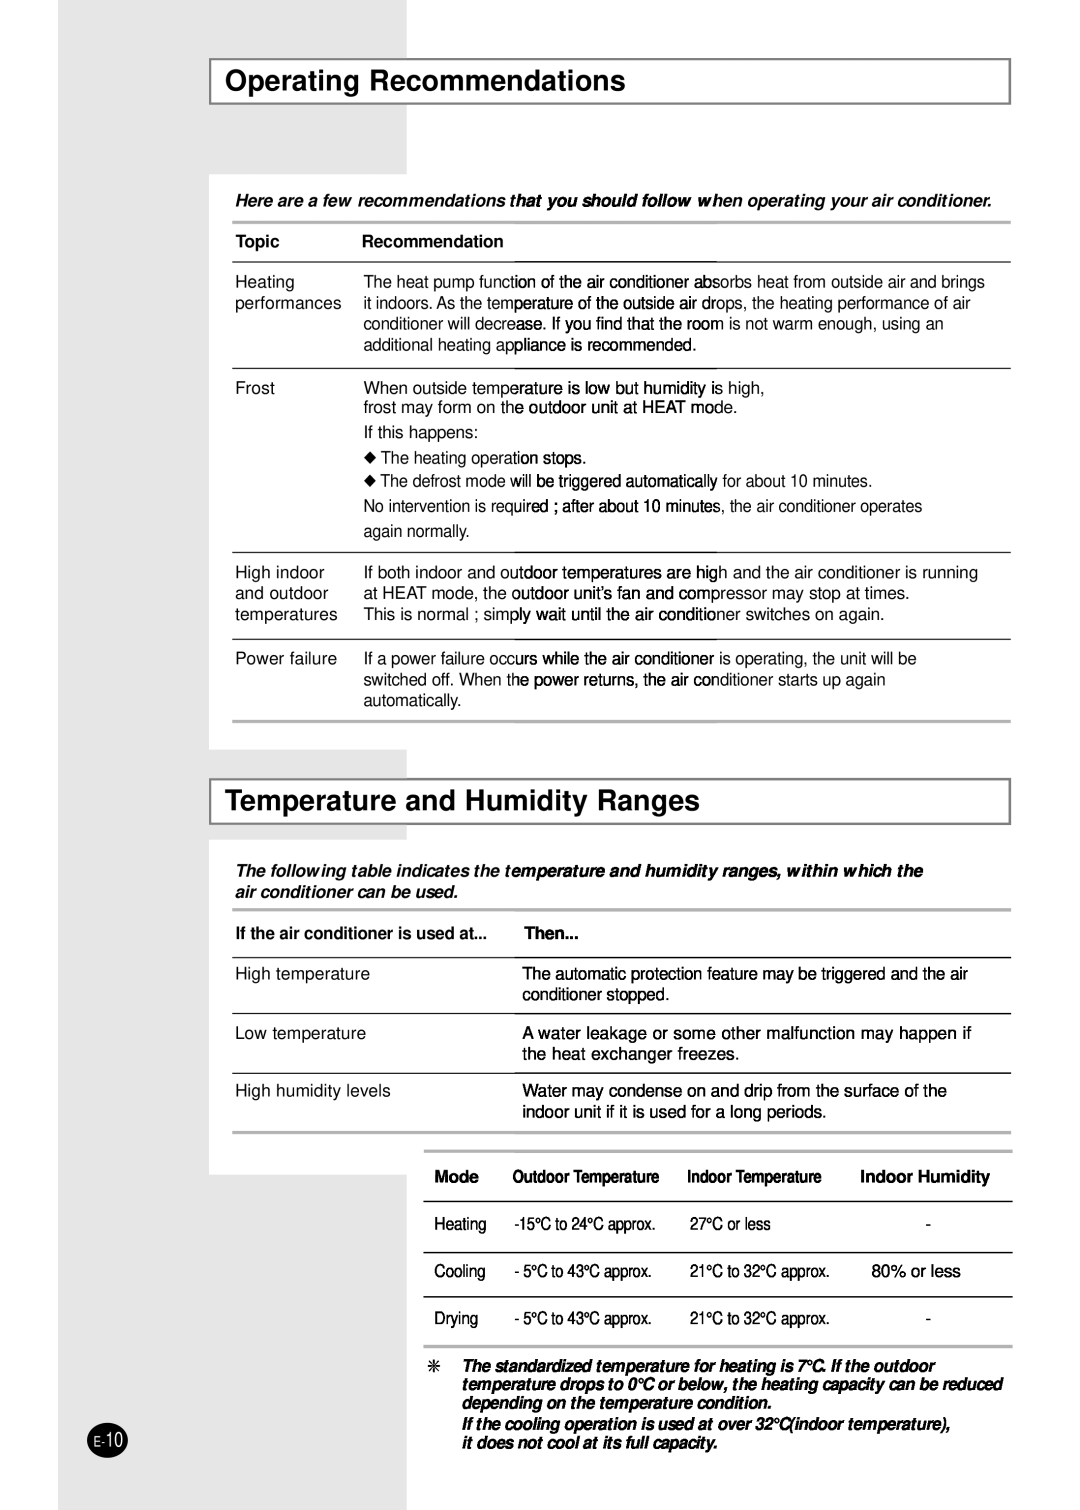 Samsung AVMWC020CA0 Operating Recommendations, Temperature and Humidity Ranges, Topic, If the air conditioner is used at 